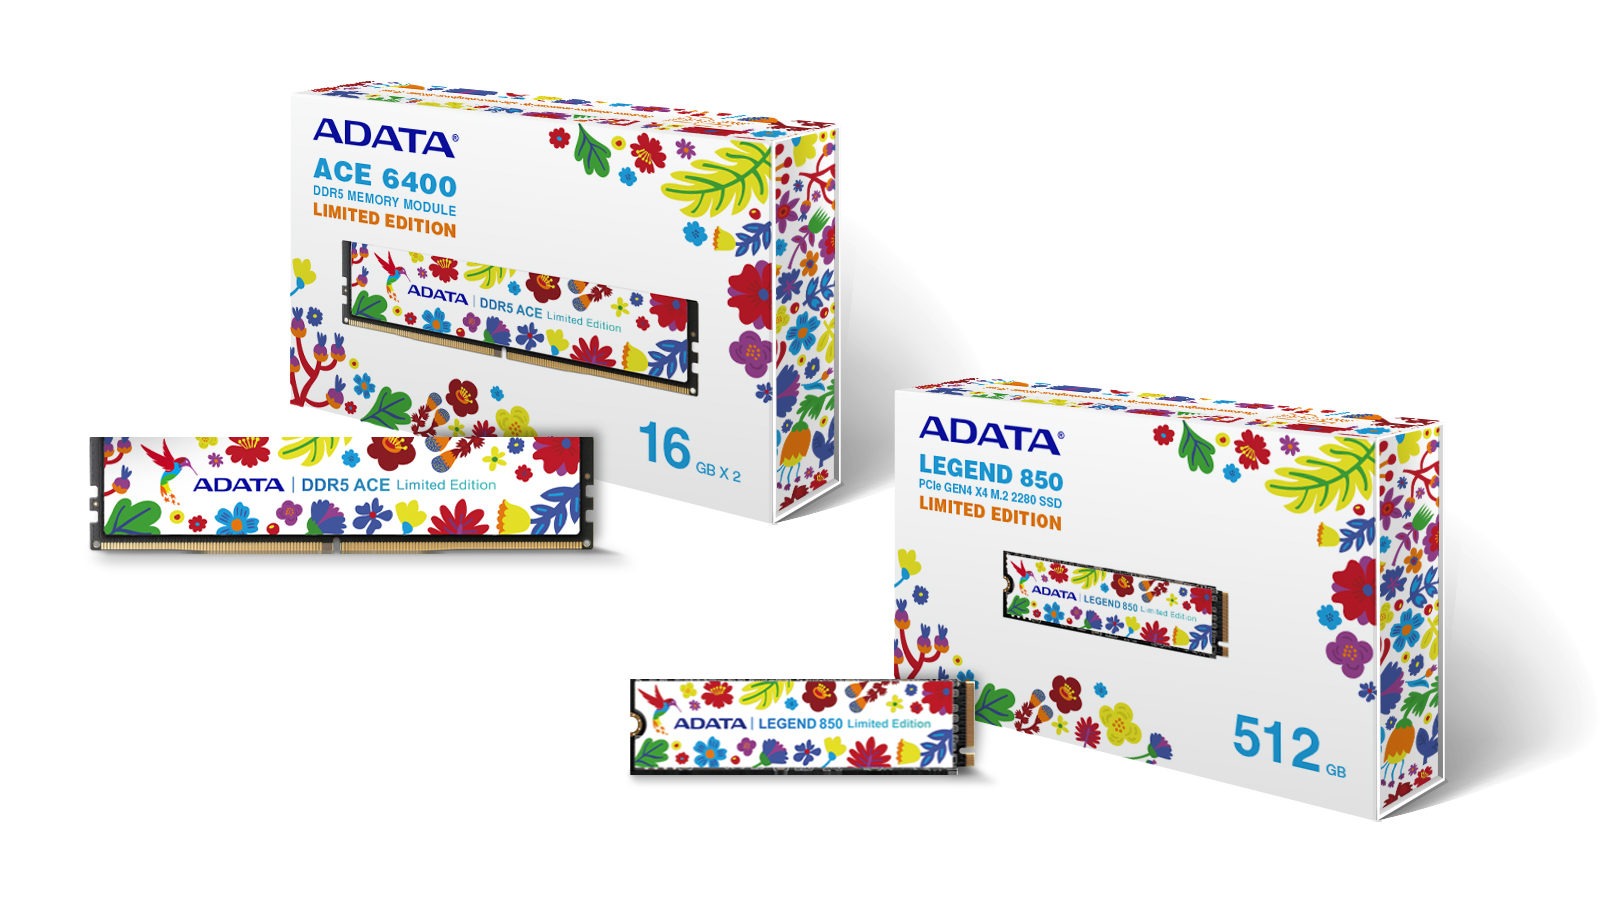 ADATA 21st Anniversary limited-edition products feature a pattern create...